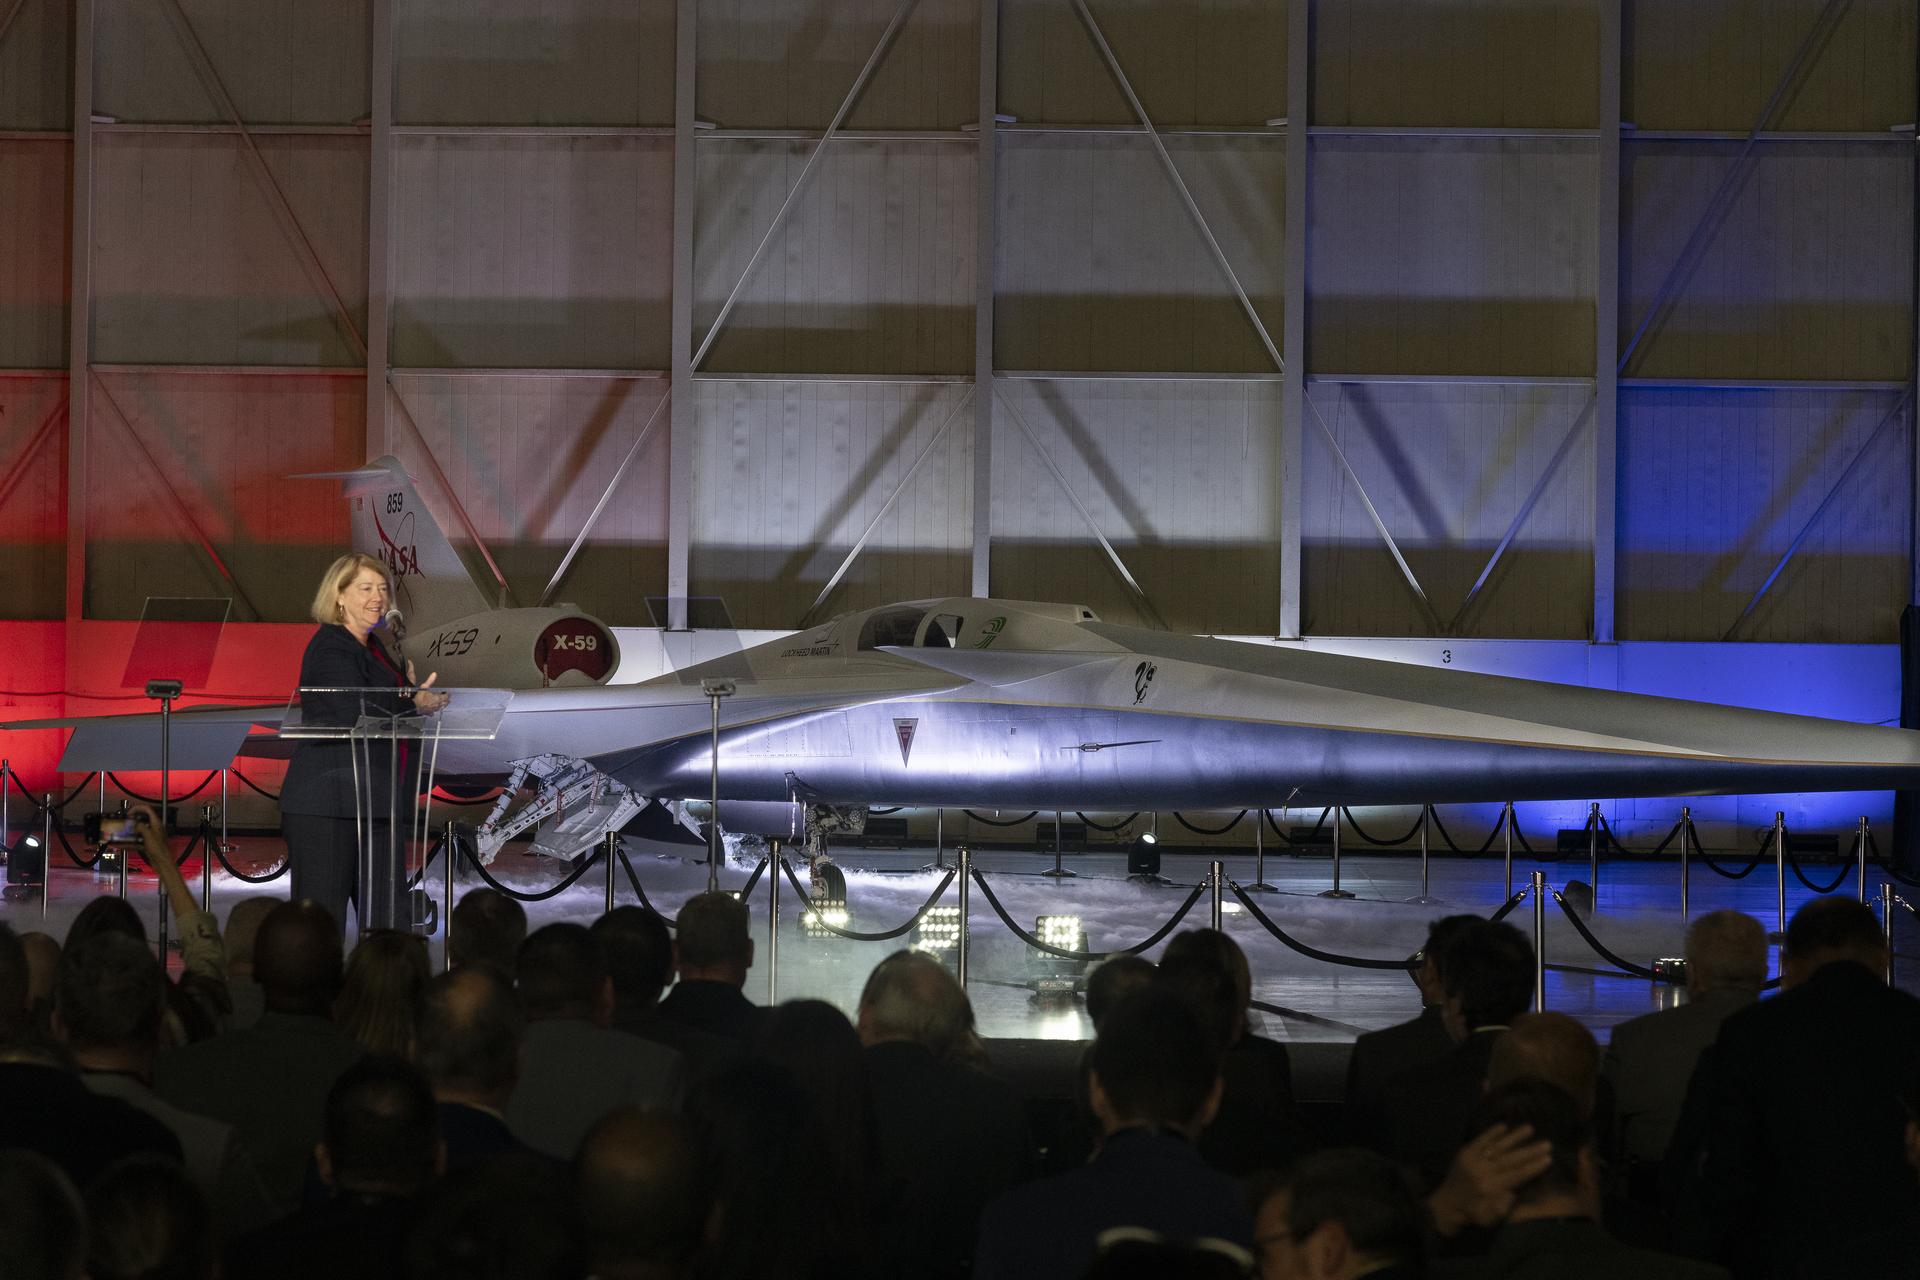 View of a lit stage inside a hangar. A woman speaks at a podium. In the immediate background, the X-59 sits, newly painted in its red, white, blue and gold livery.